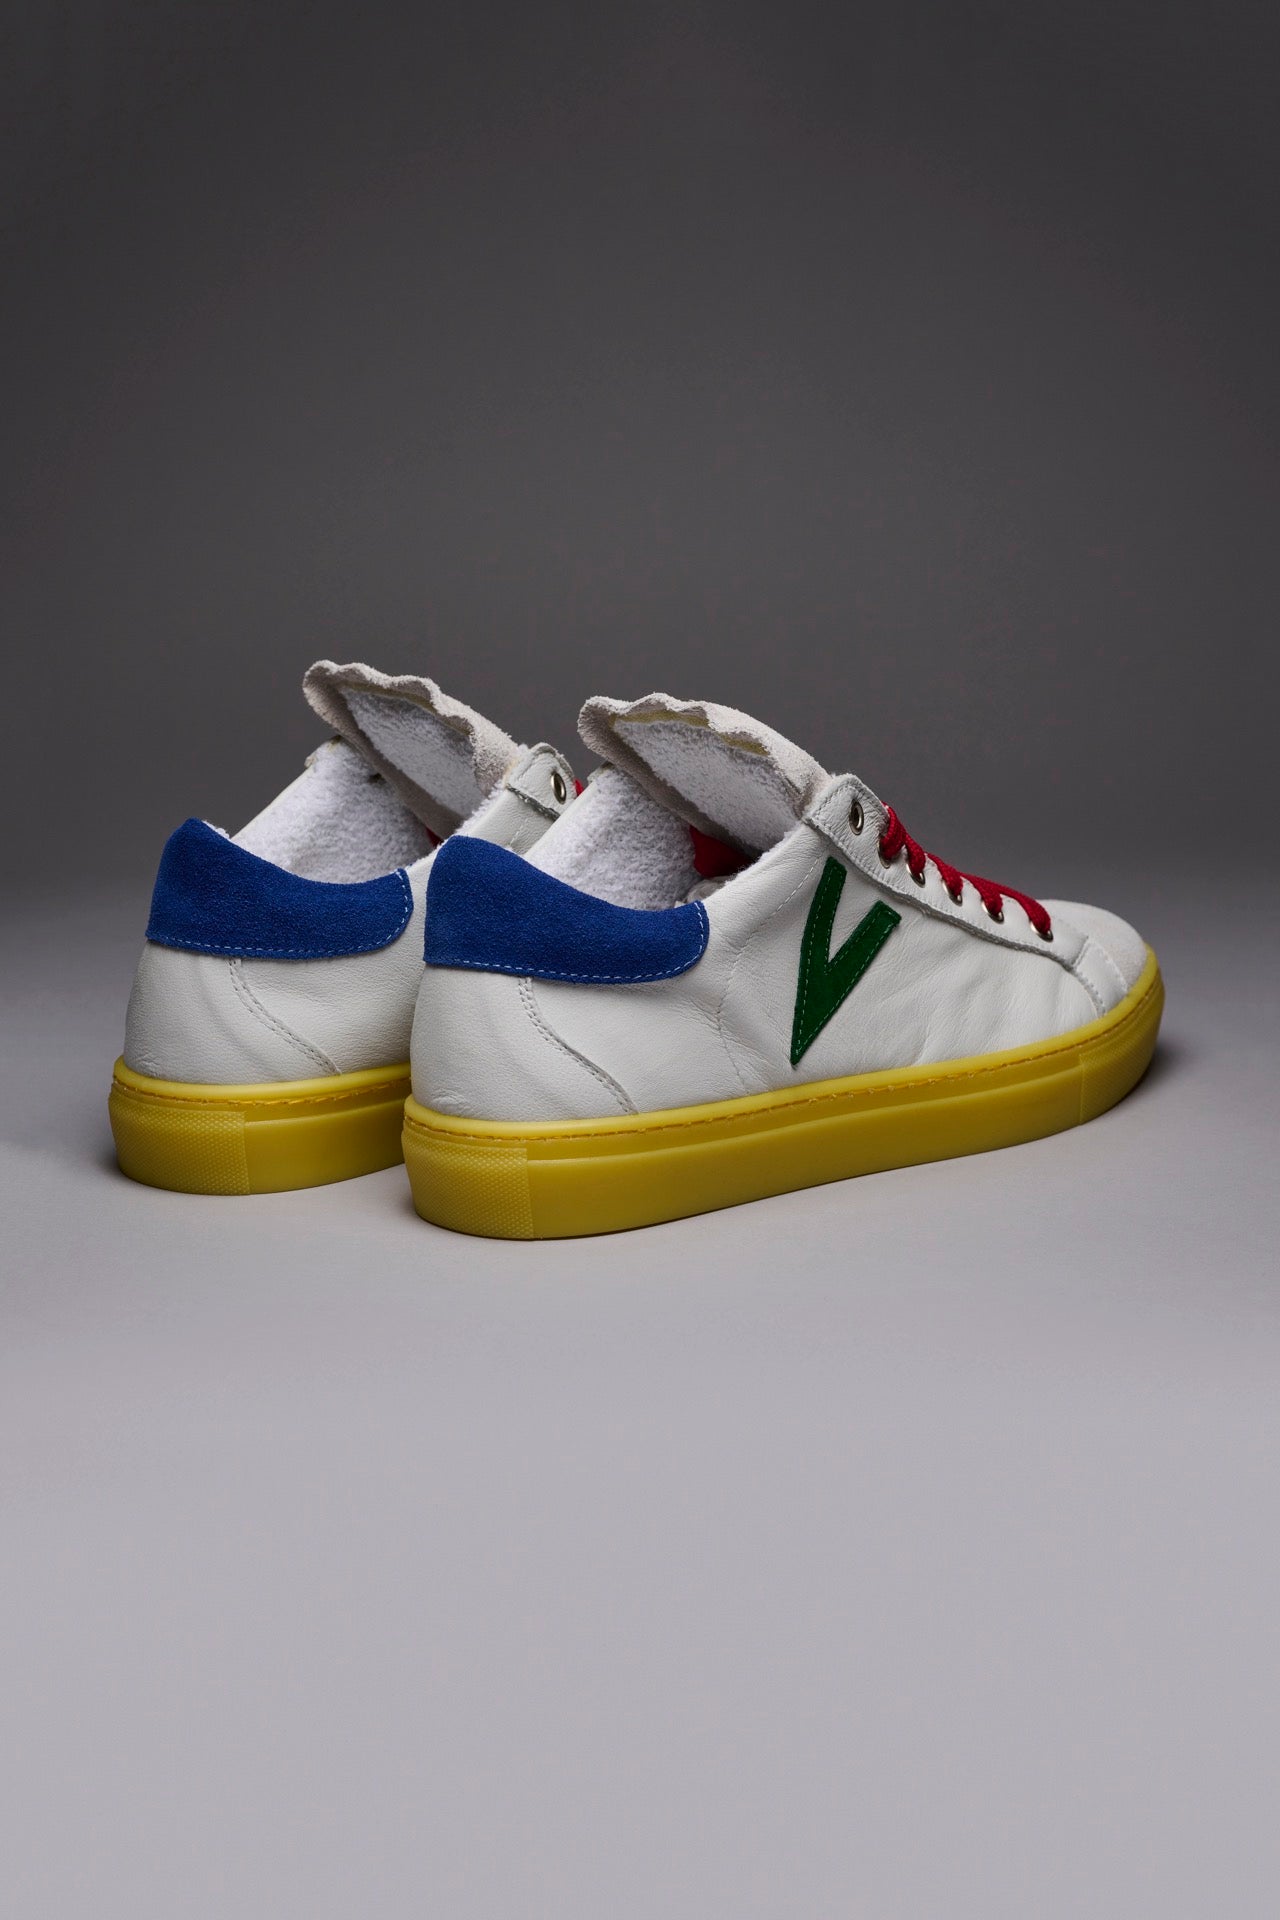 OLYMPIC RAINBOW - Sneakers with yellow sole, multicolor inserts and laces